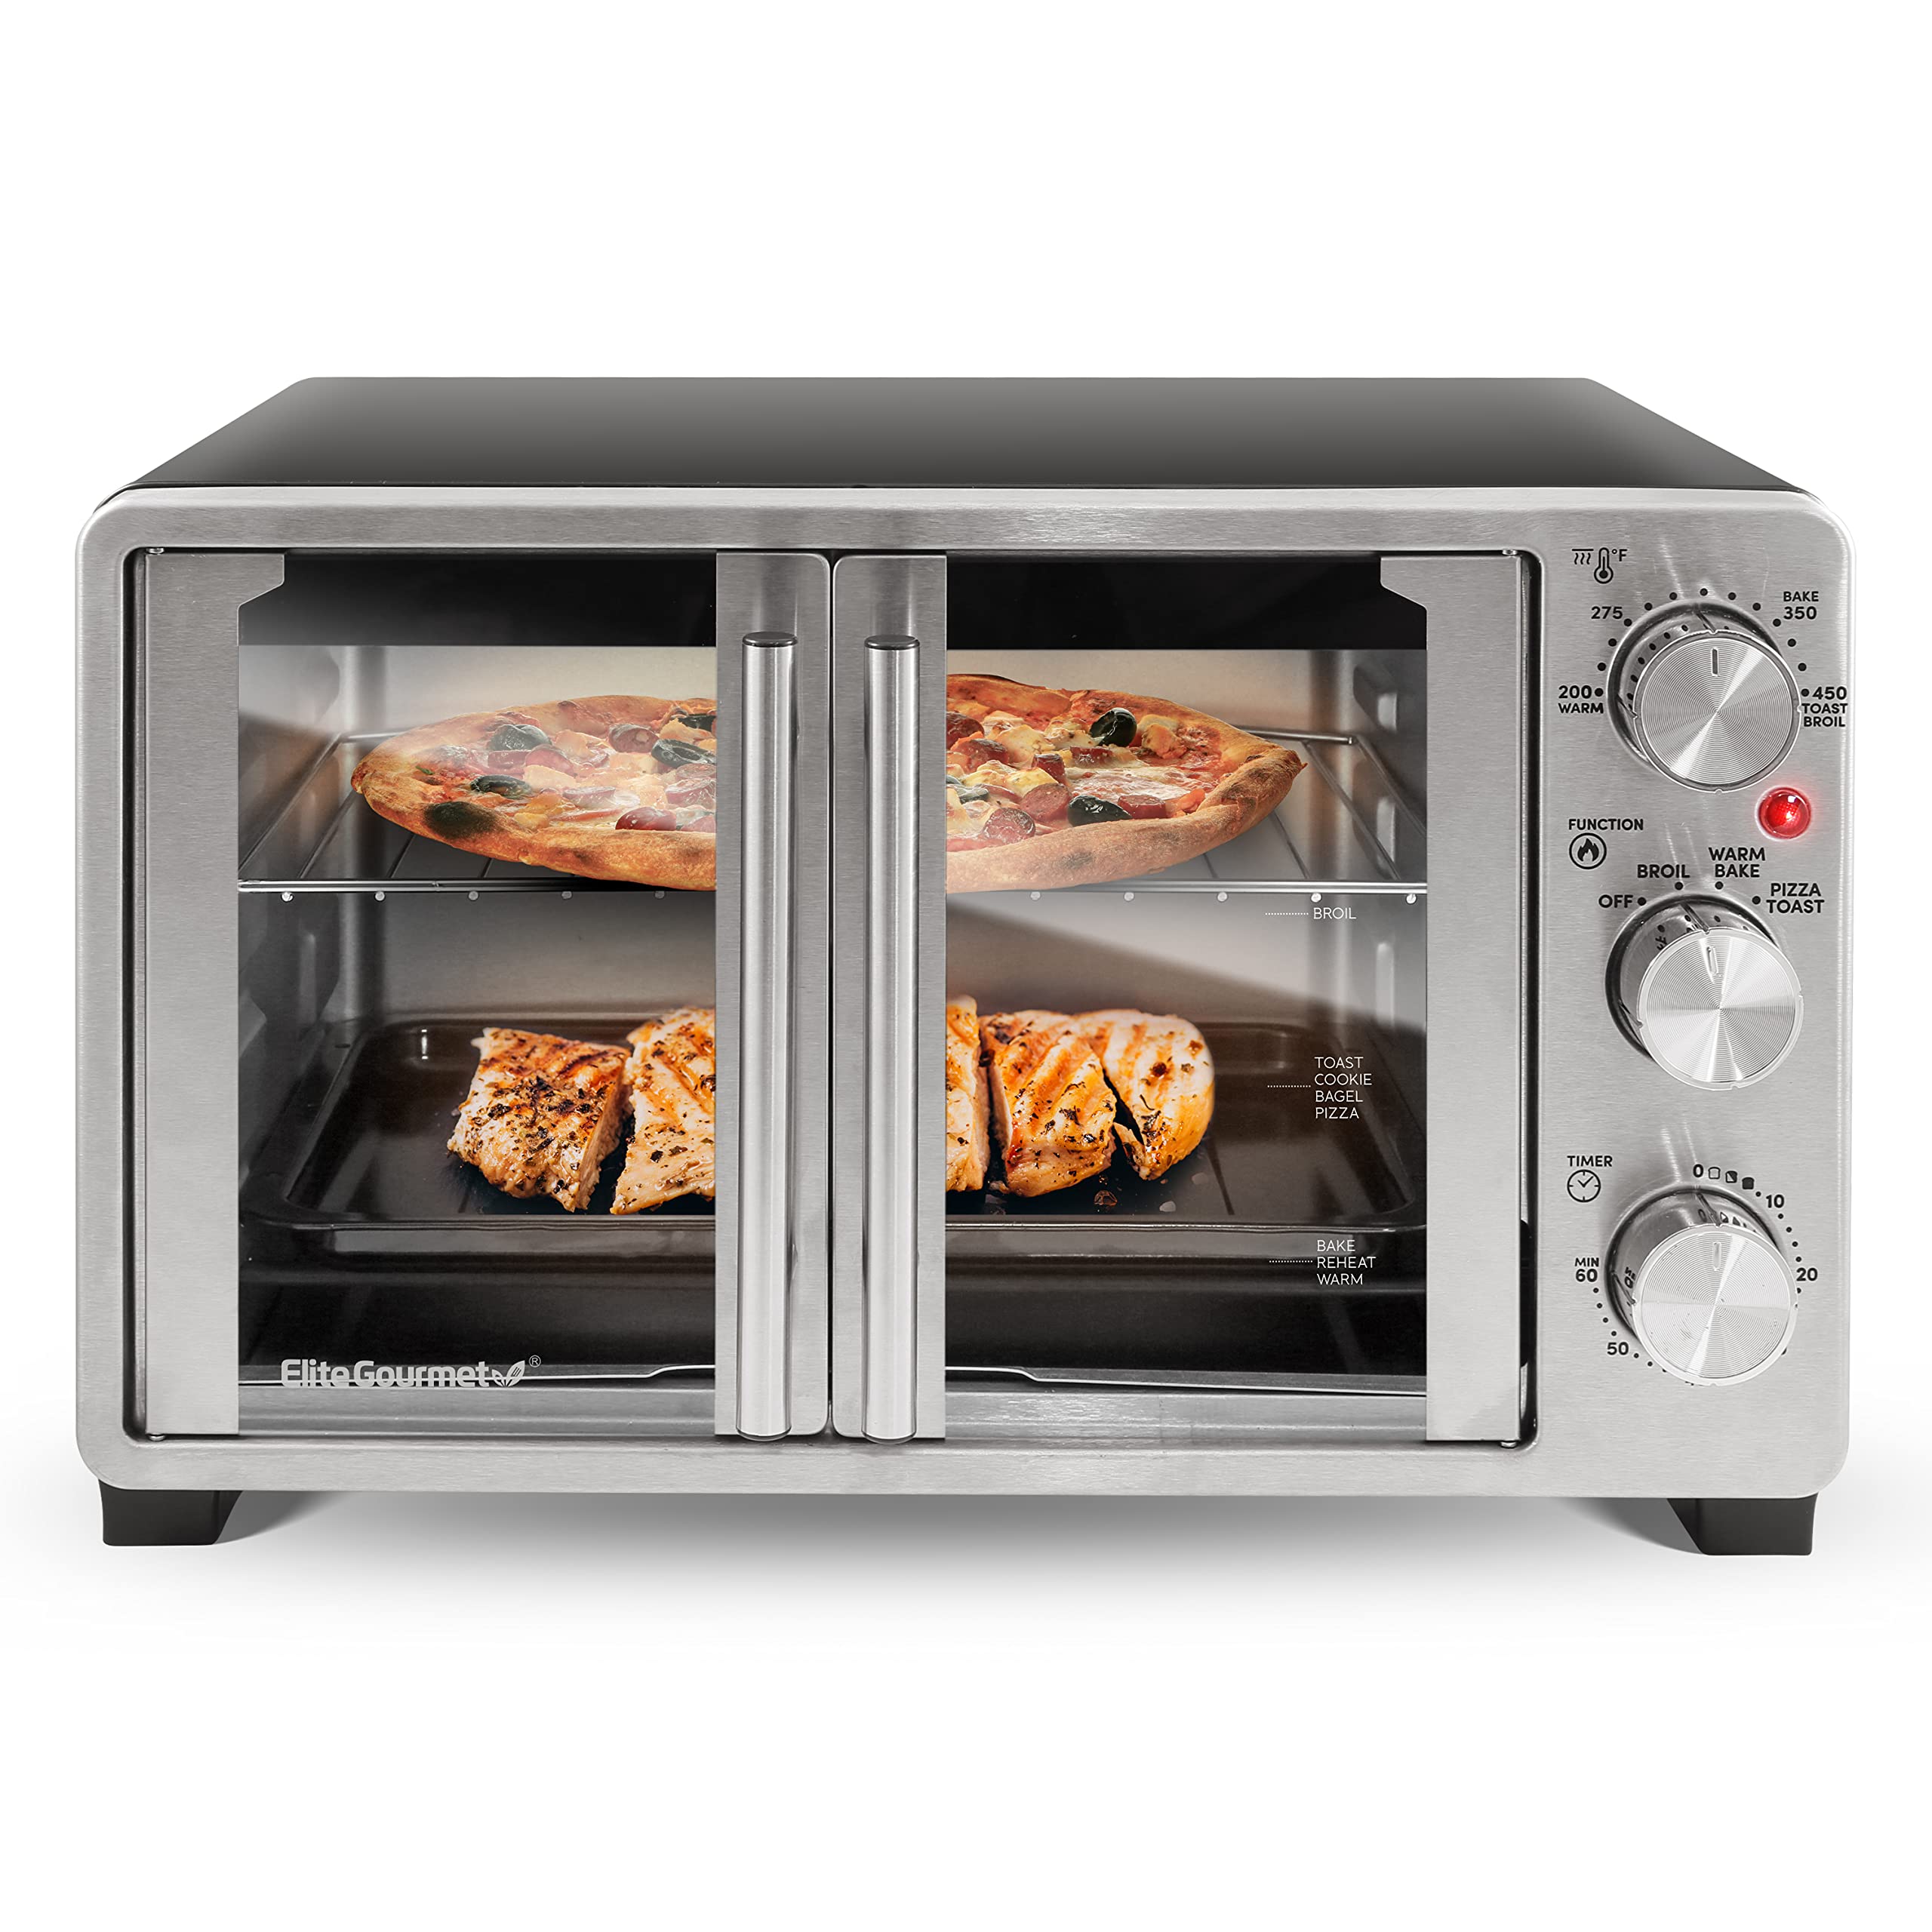 Elite Gourmet ETO2530M Double French Door Countertop Toaster Oven, Bake, Broil, Toast, Keep Warm, Fits 12